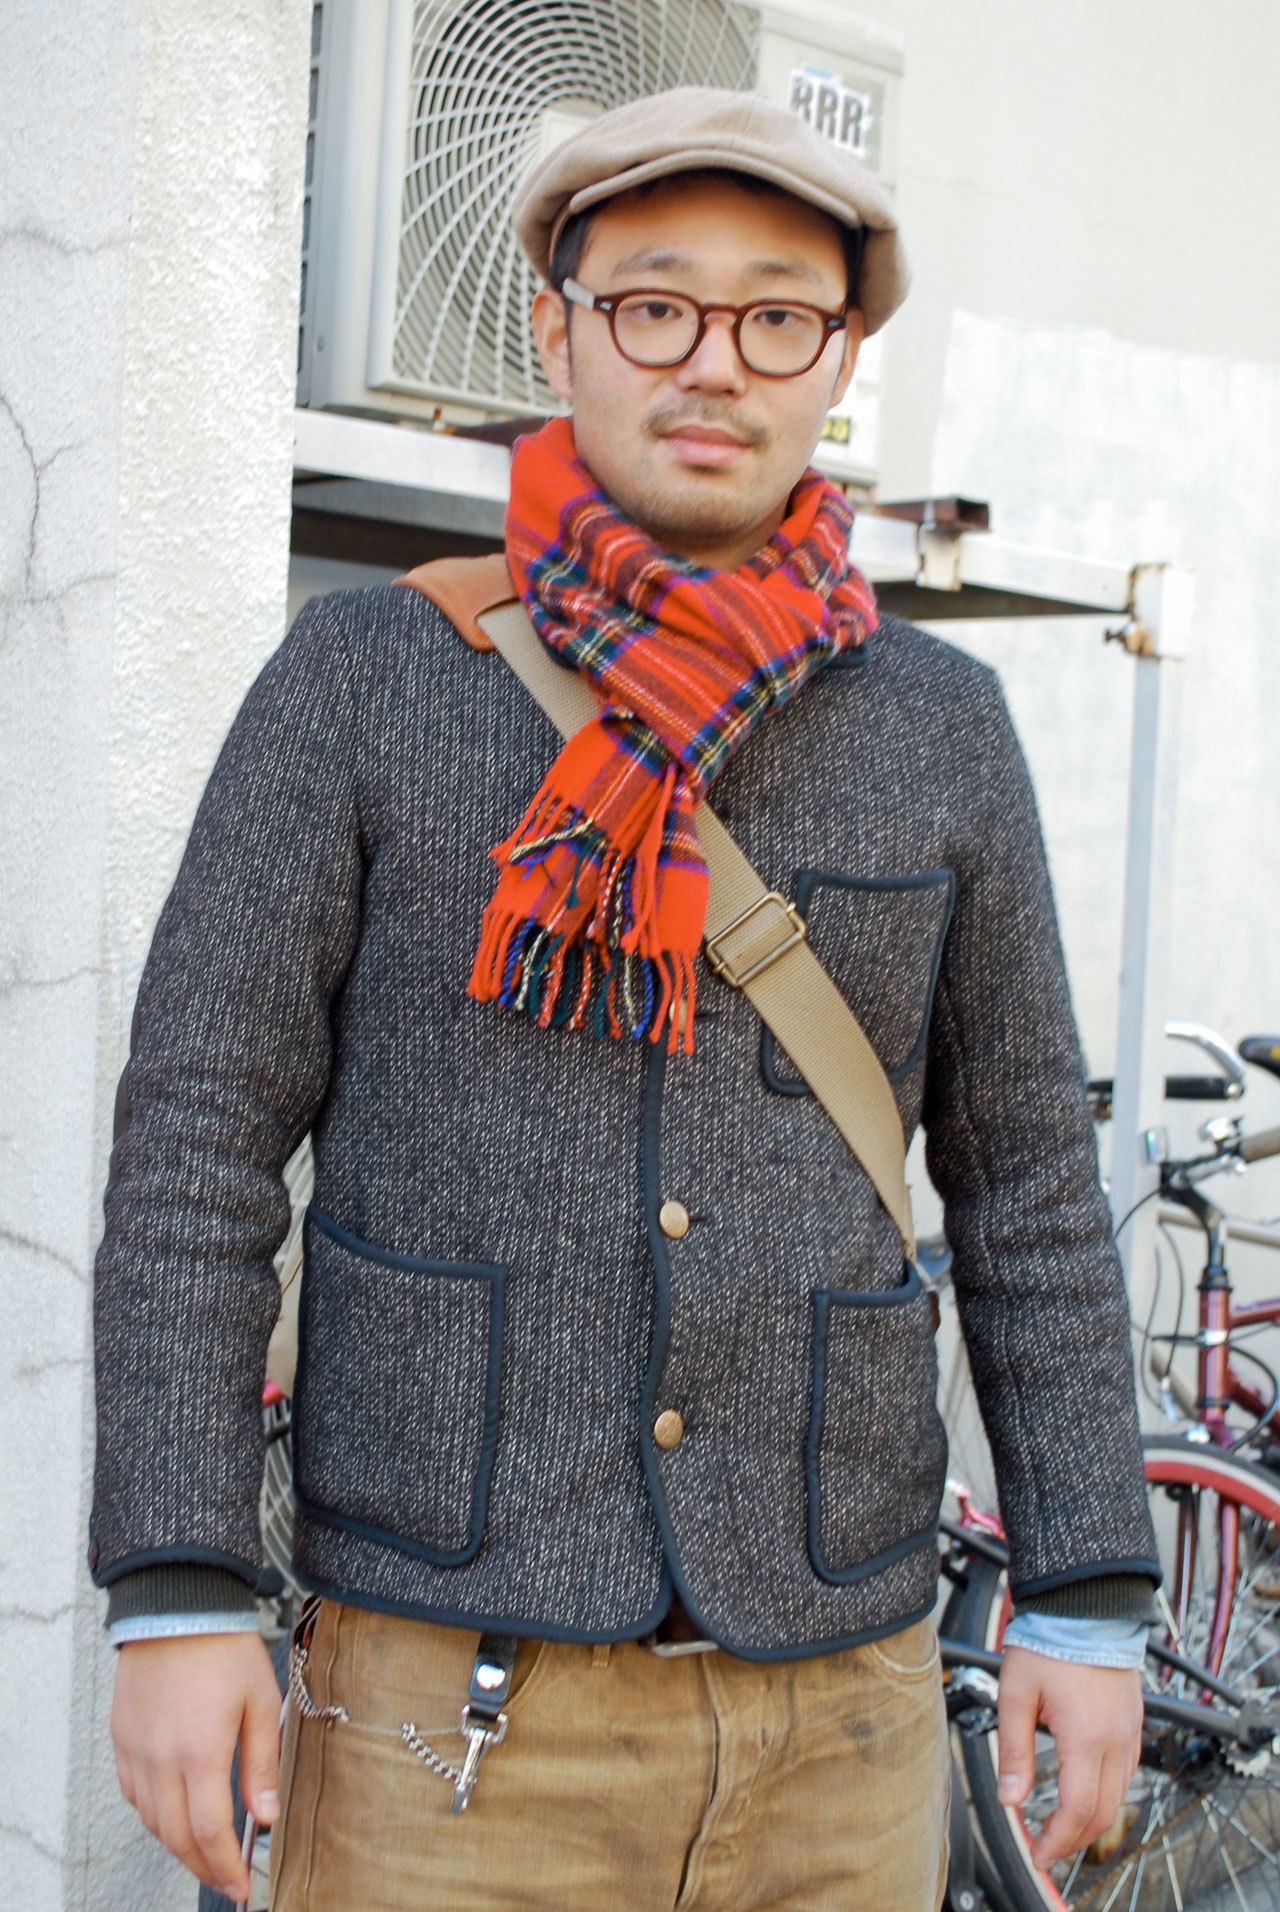 Men Scarves Fashion - 18 Tips On How to Wear Scarves Stylishly